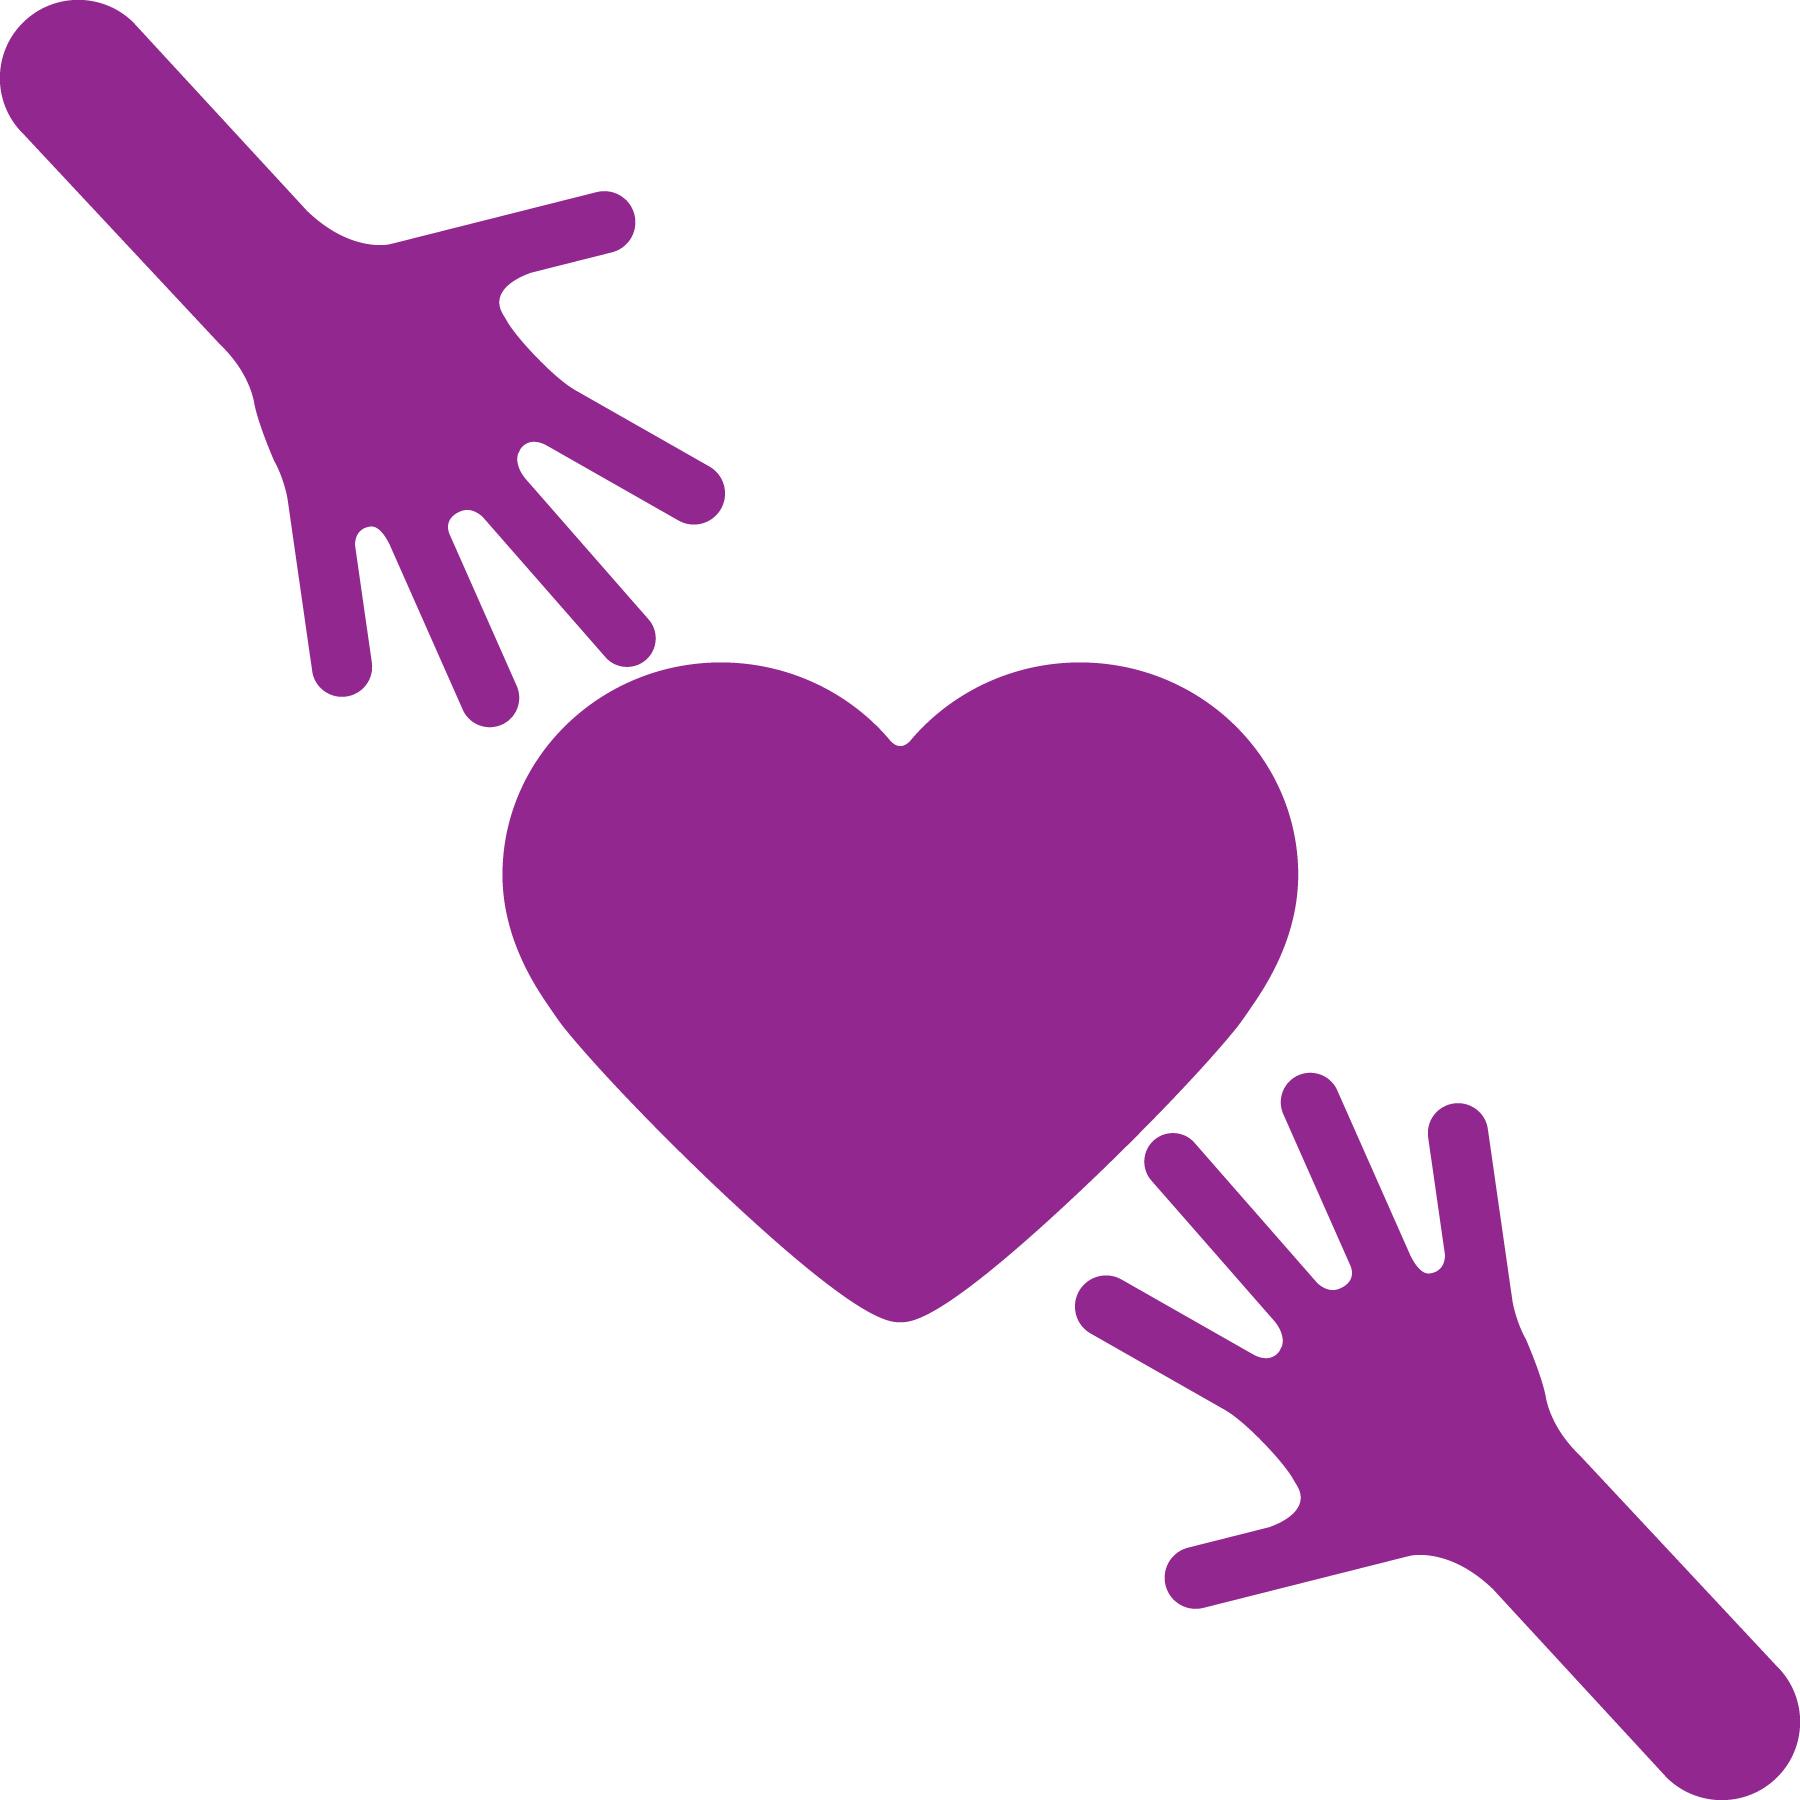 Illustration of two hands reaching for a heart